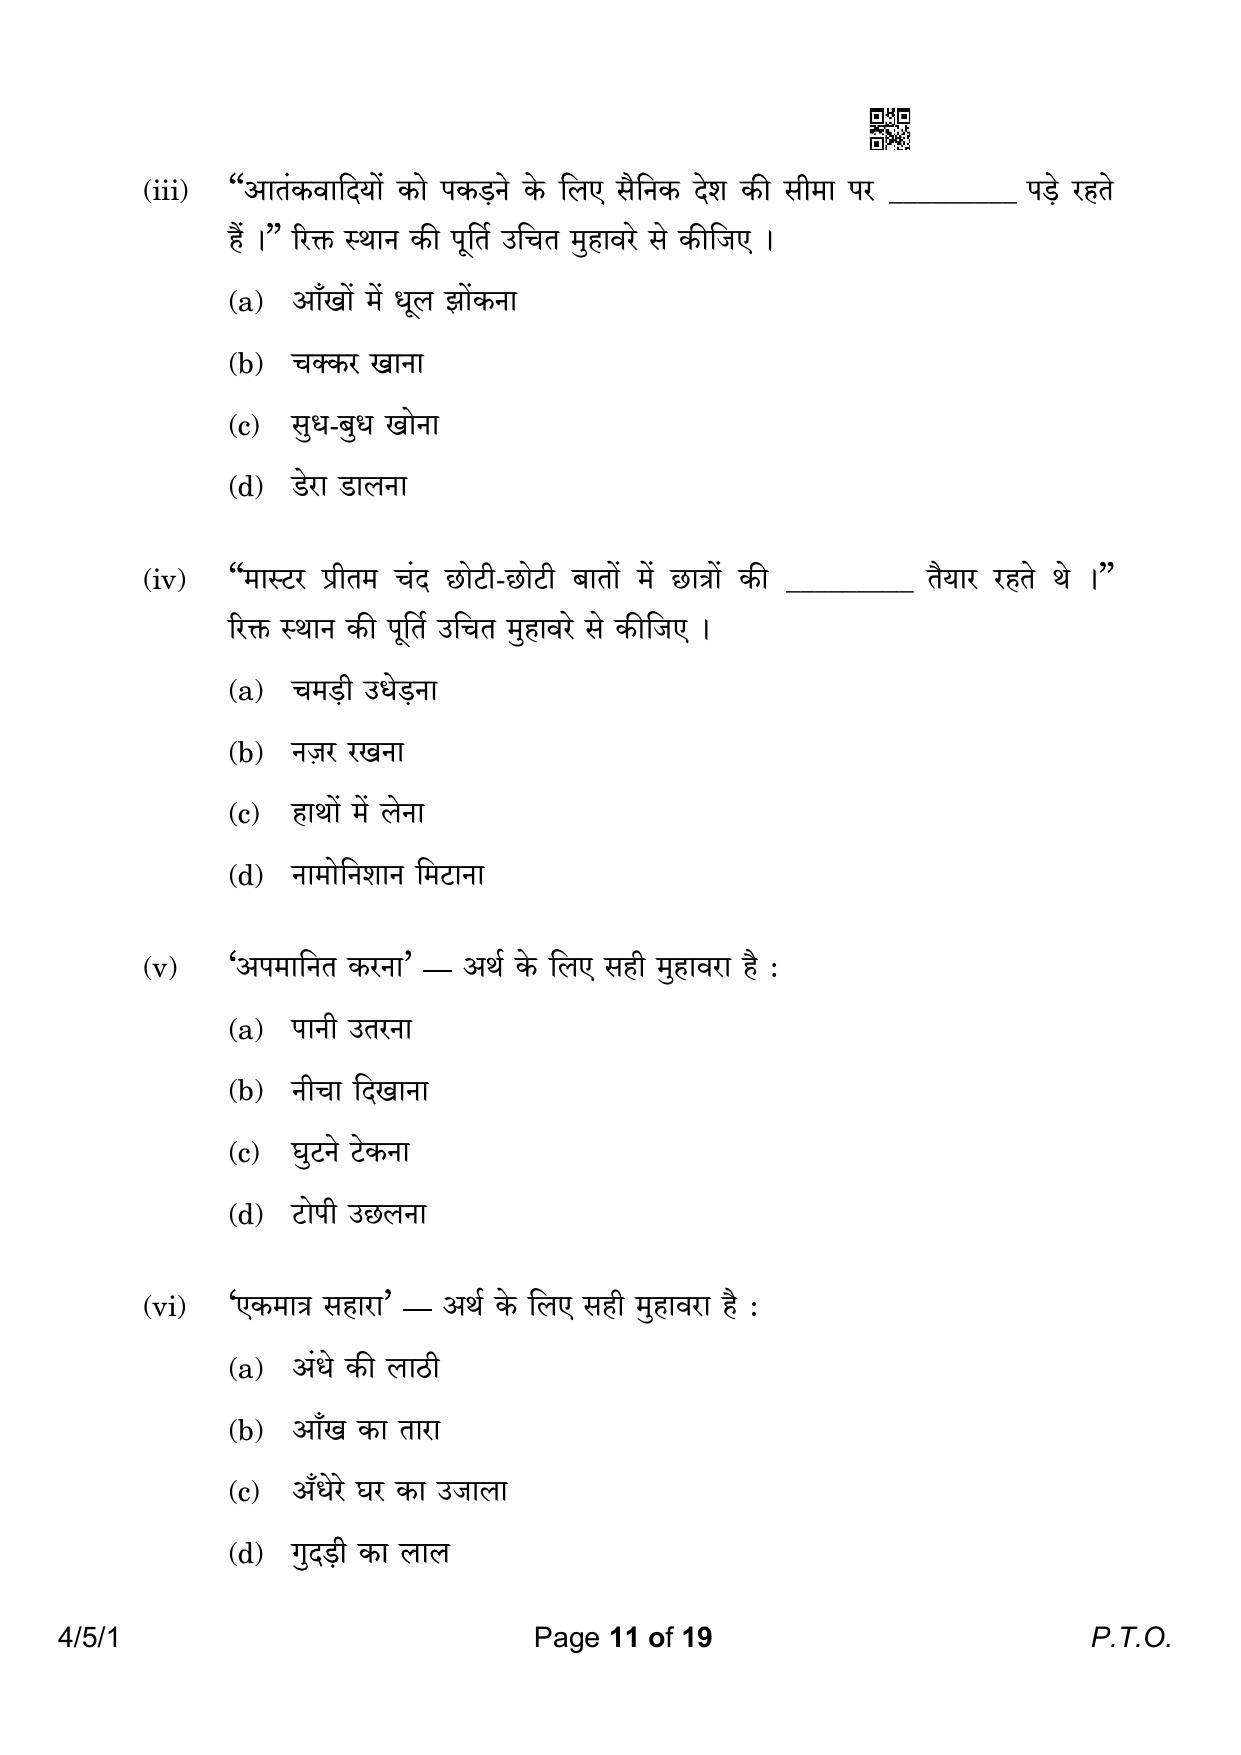 CBSE Class 10 4-5-1 Hindi B 2023 Question Paper - Page 11